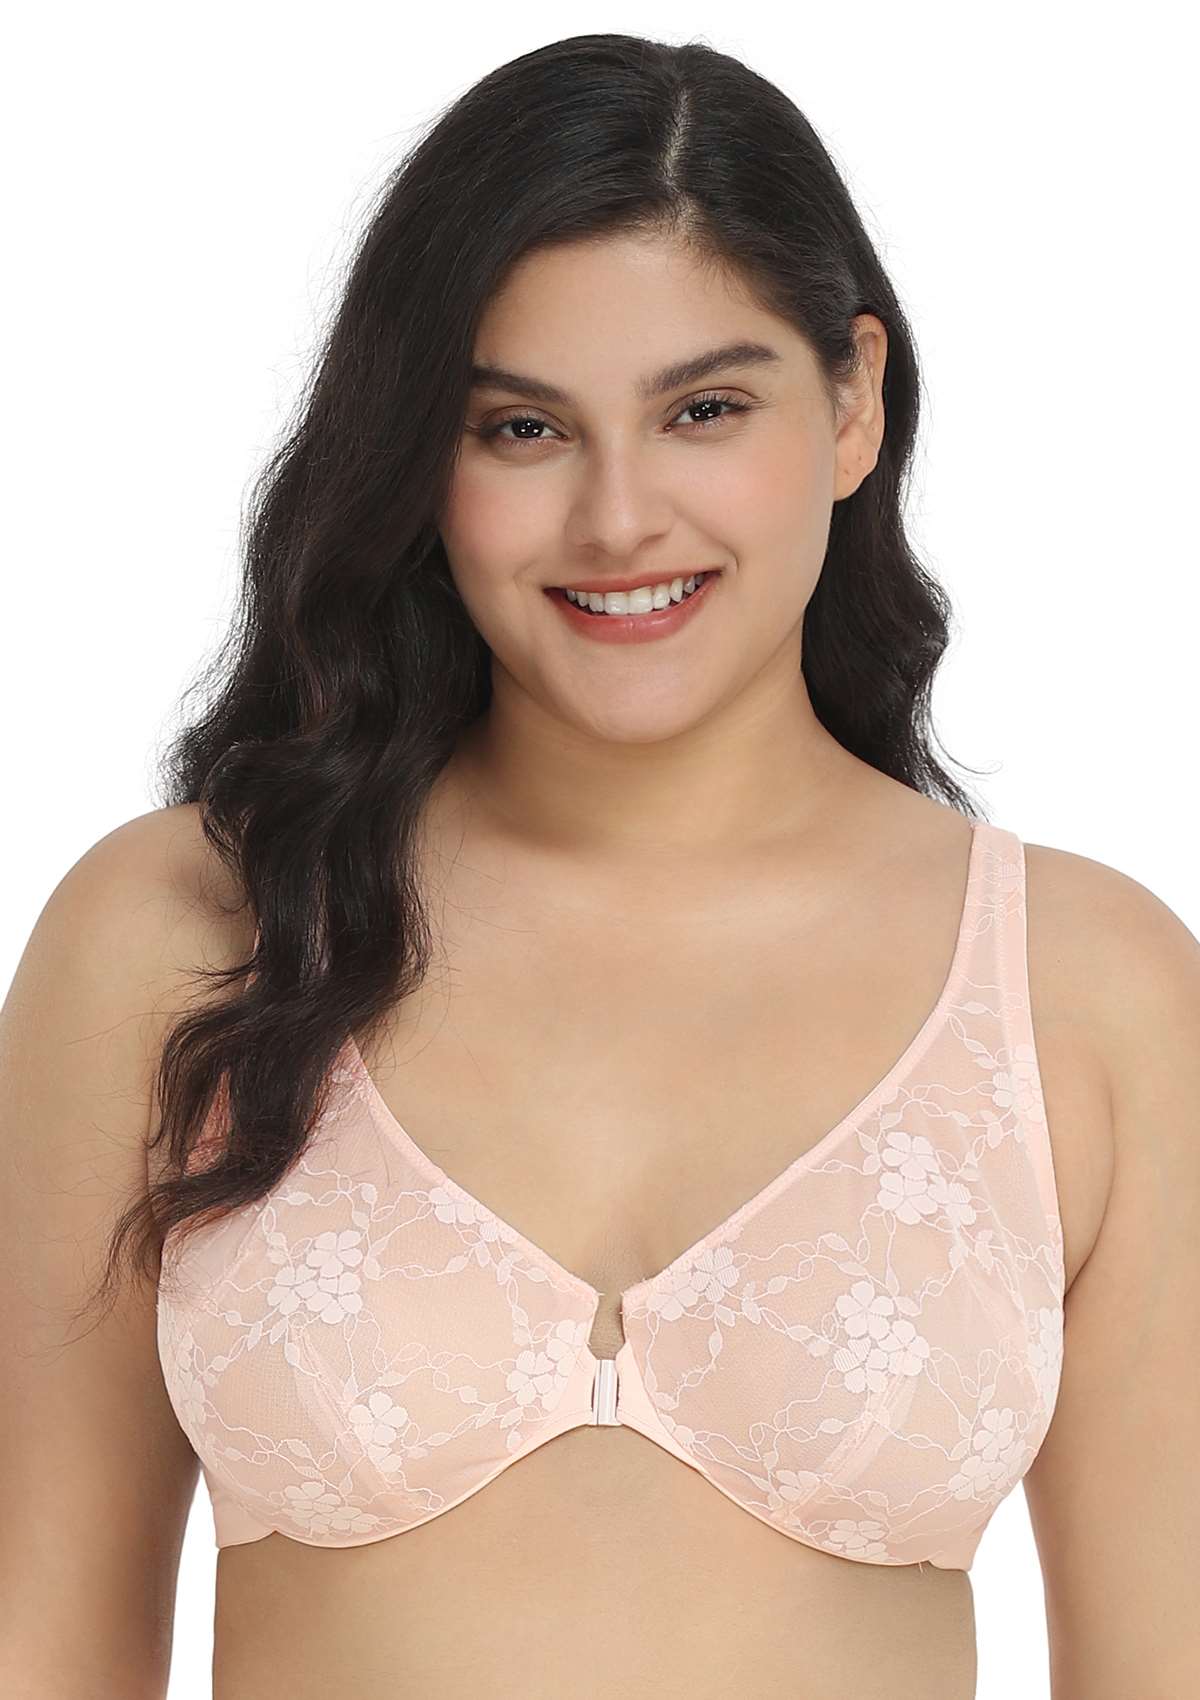 HSIA Spring Romance Front-Close Floral Lace Unlined Full Coverage Bra - White / 34 / H